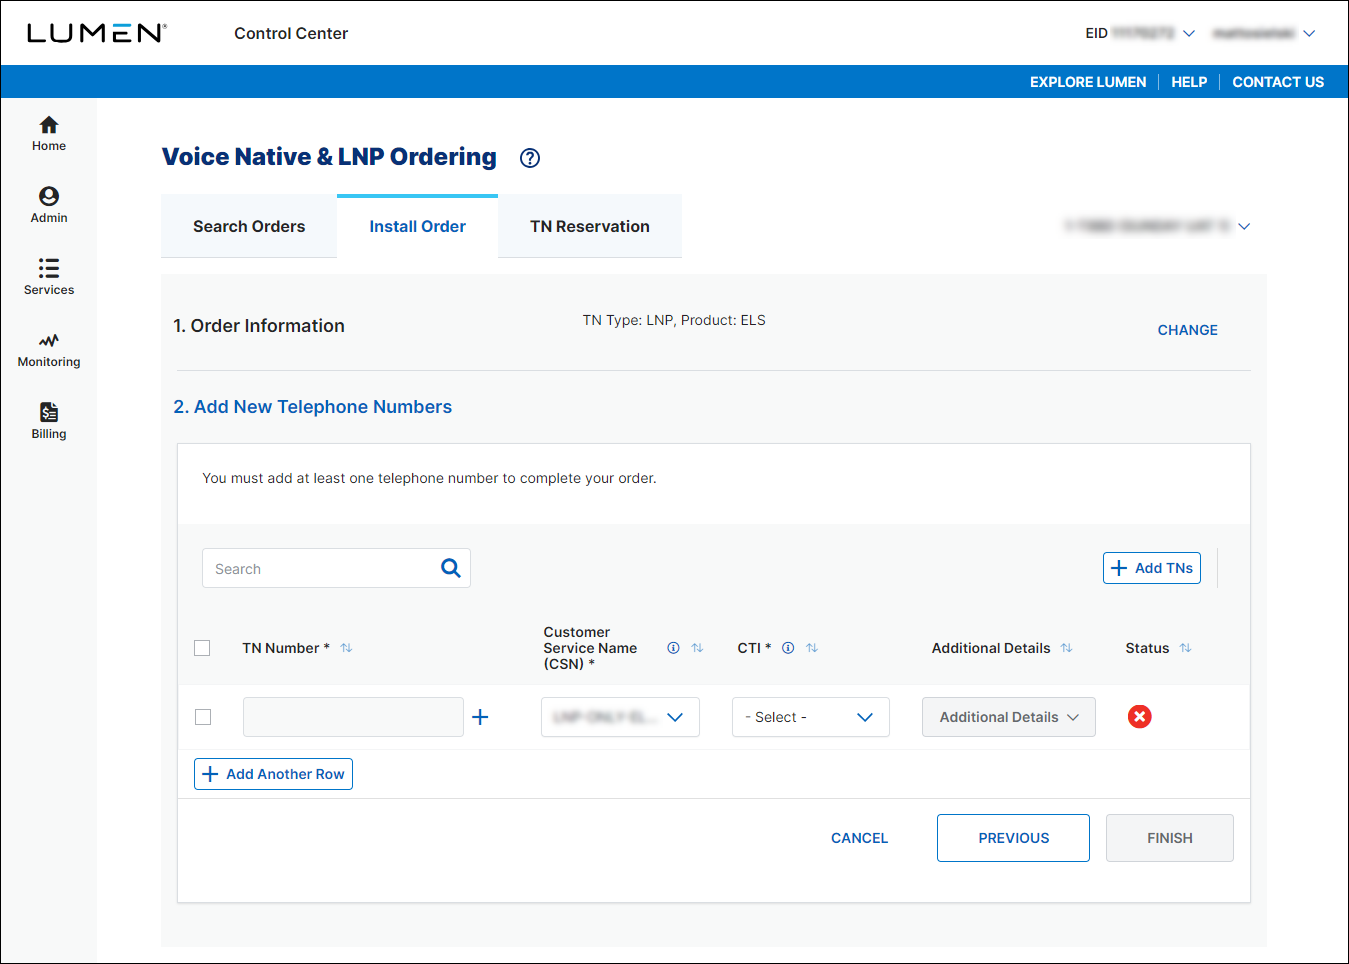 Voice Native & LNP Ordering (showing Install Order tab and Add New Telephone Numbers section for LNP ELS)